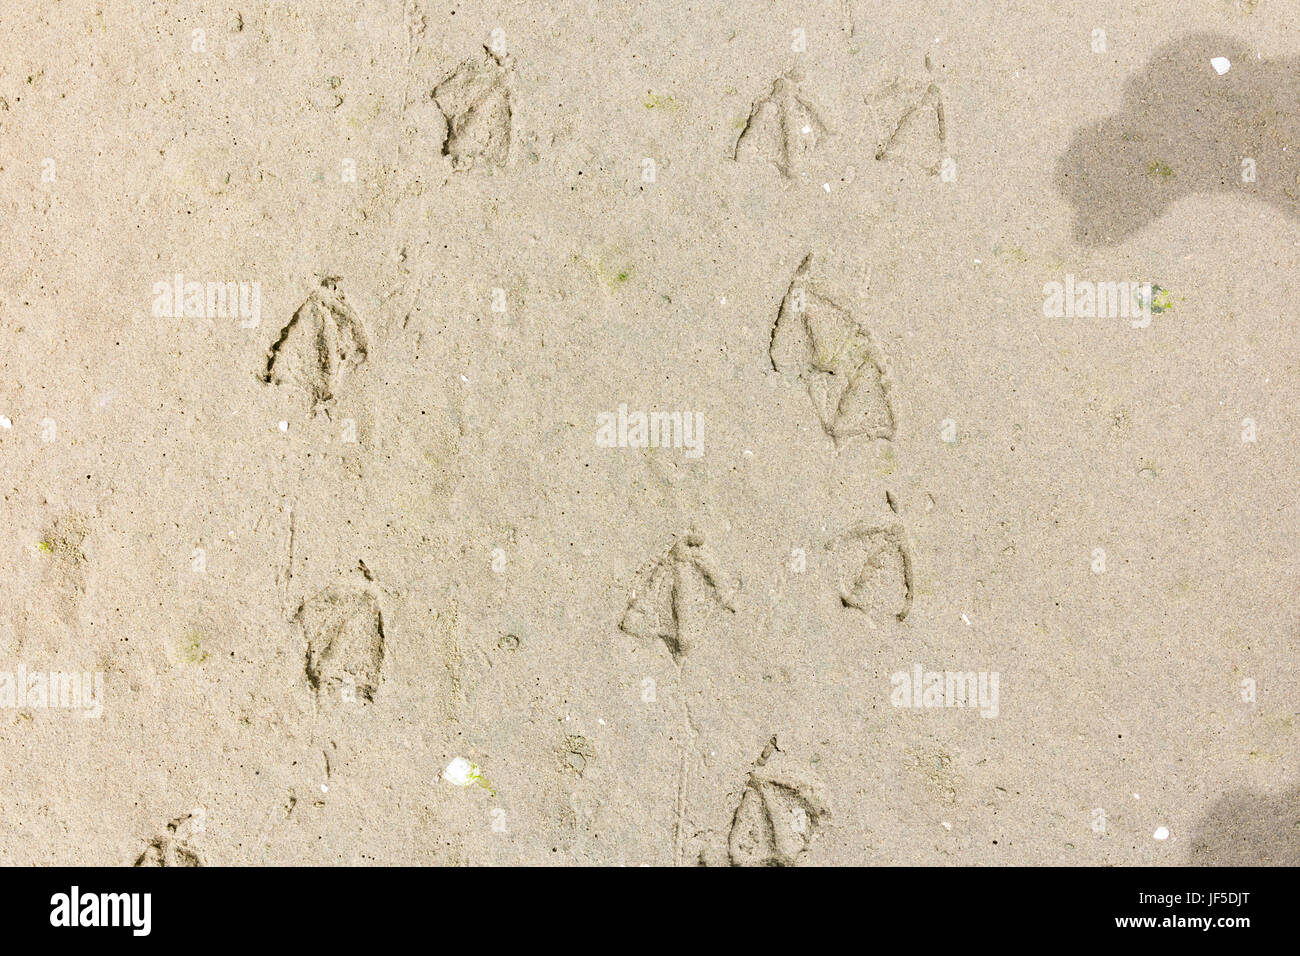 Trail of foot prints of walking seabirds with webbed feet in sand on beach, Netherlands Stock Photo